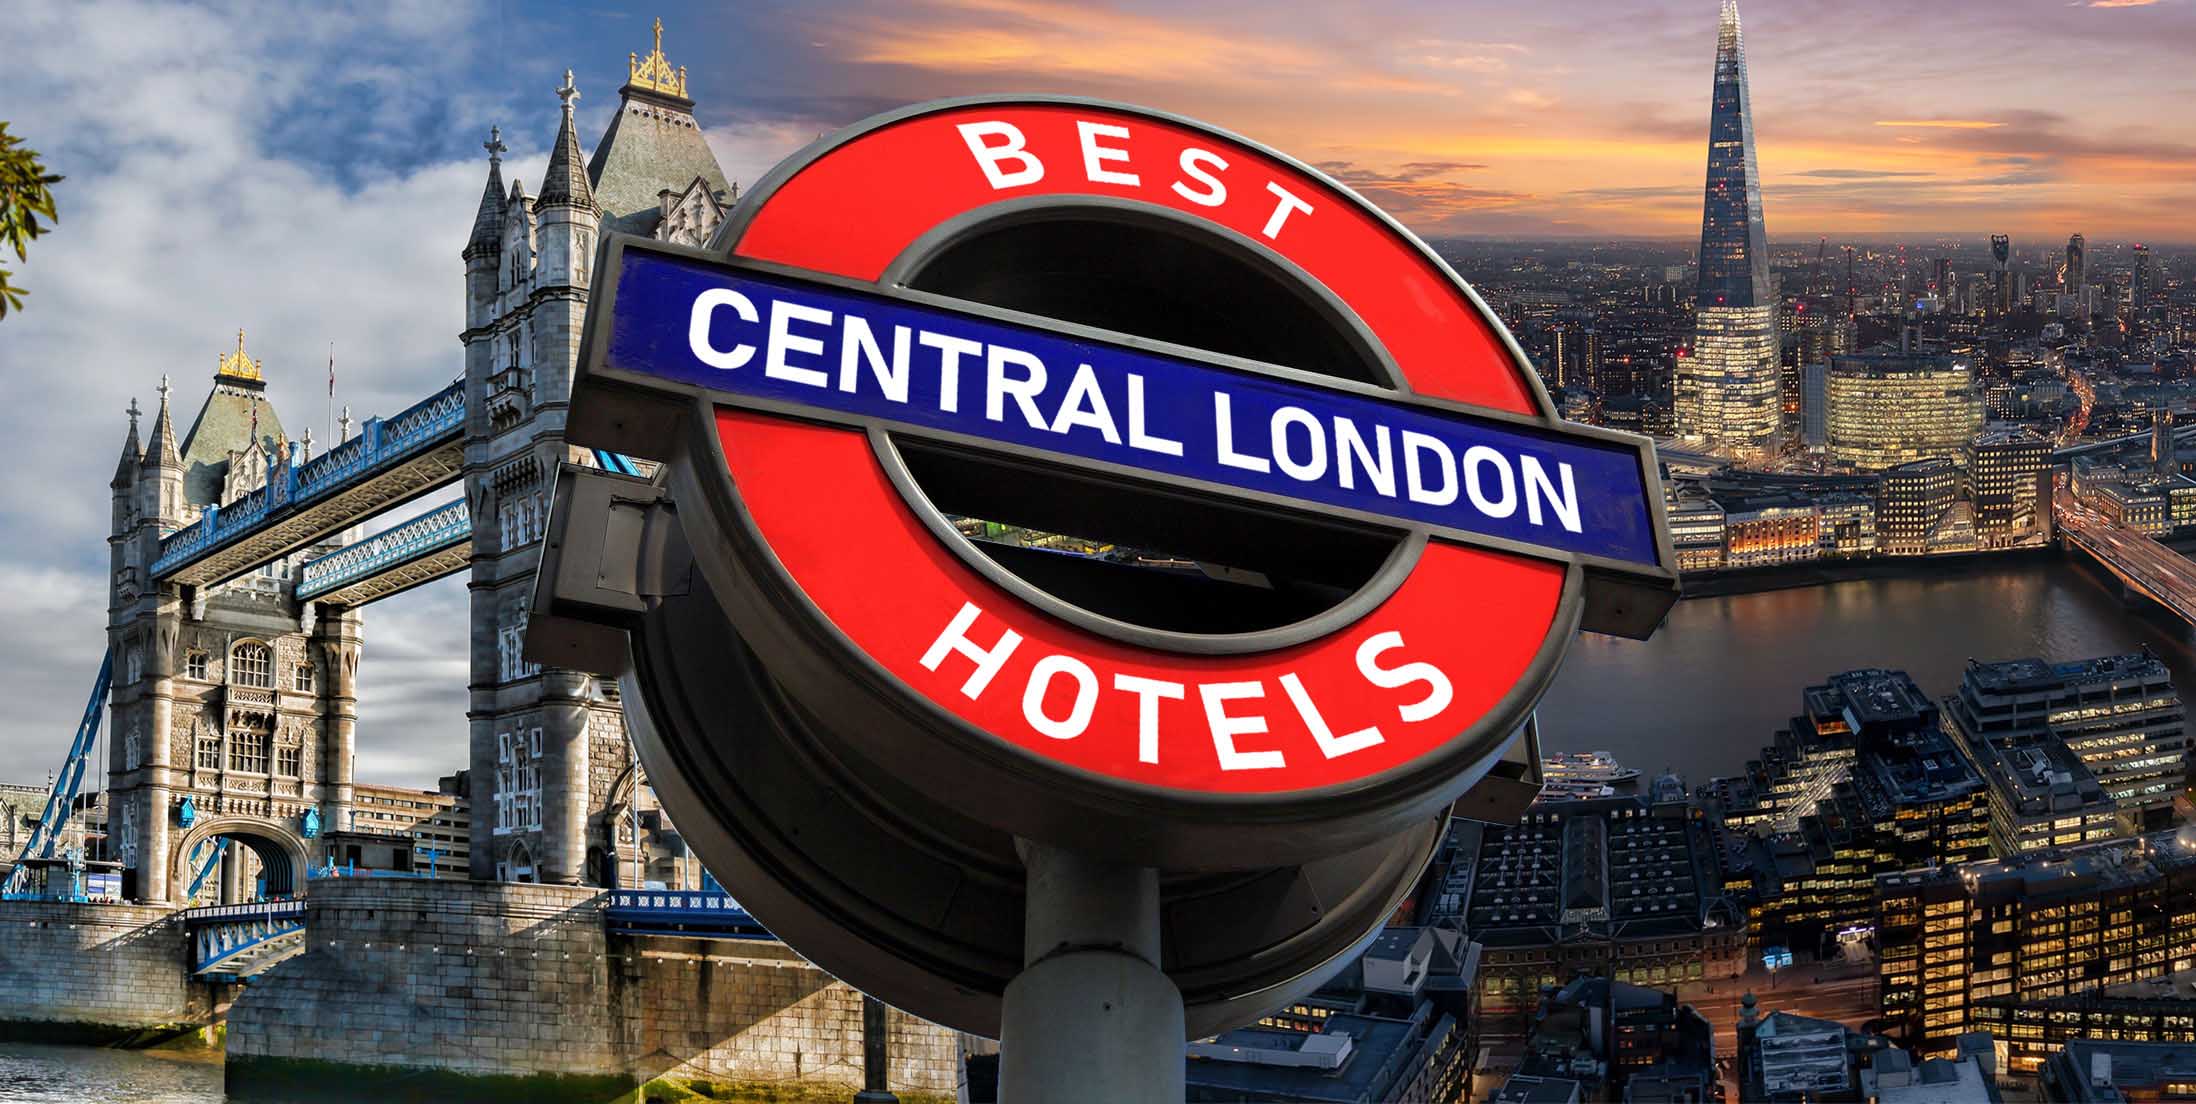 Best Hotels in Central London